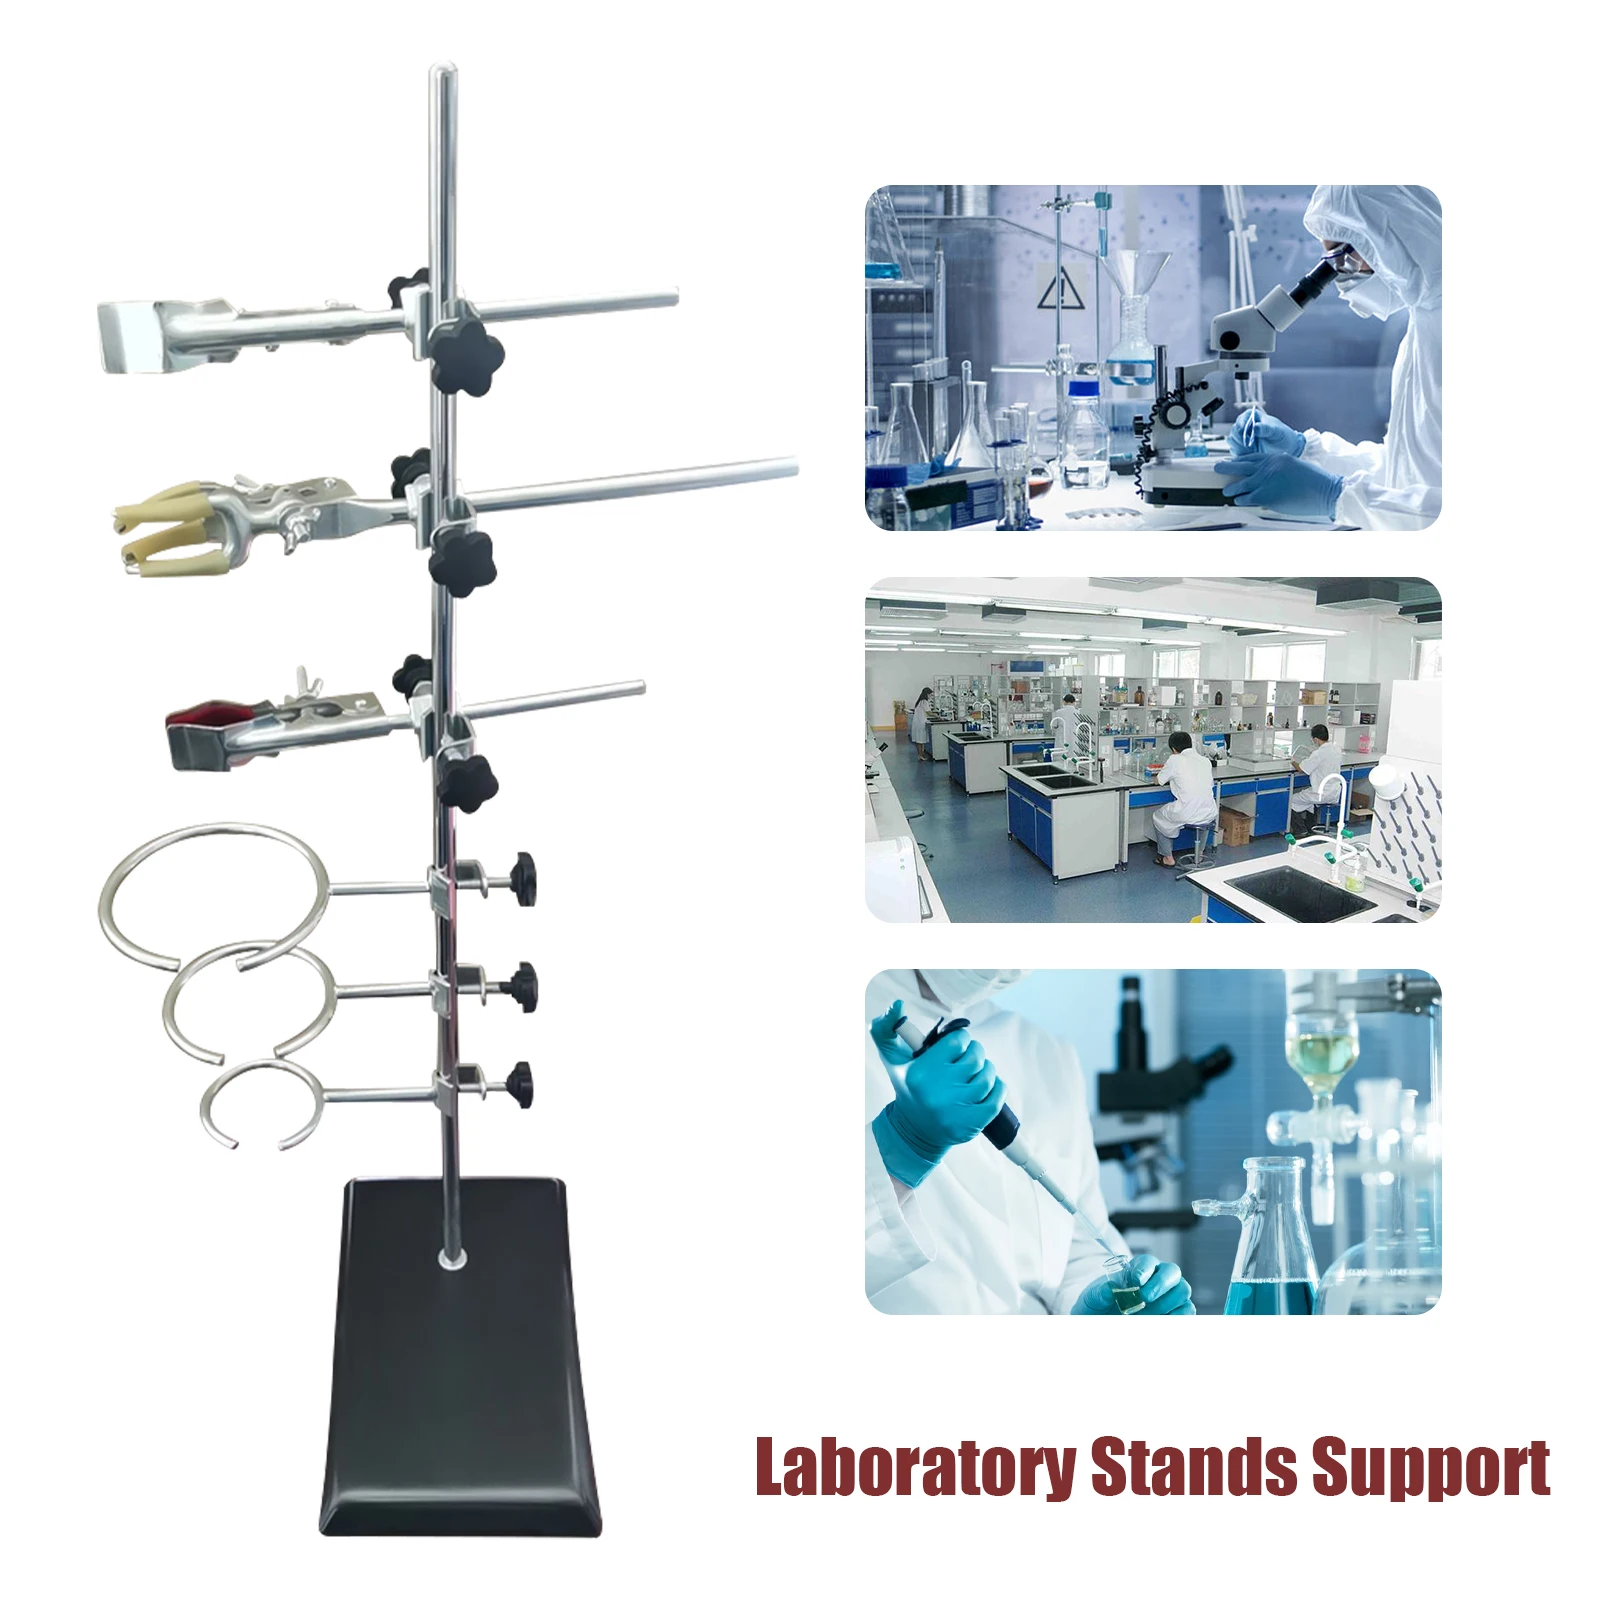 Laboratory Stands Support and Lab Clamp Flask Clamp Condenser Clamp Stands 600mm 52cm lab laboratory retort stands support clamp flask platform set high height